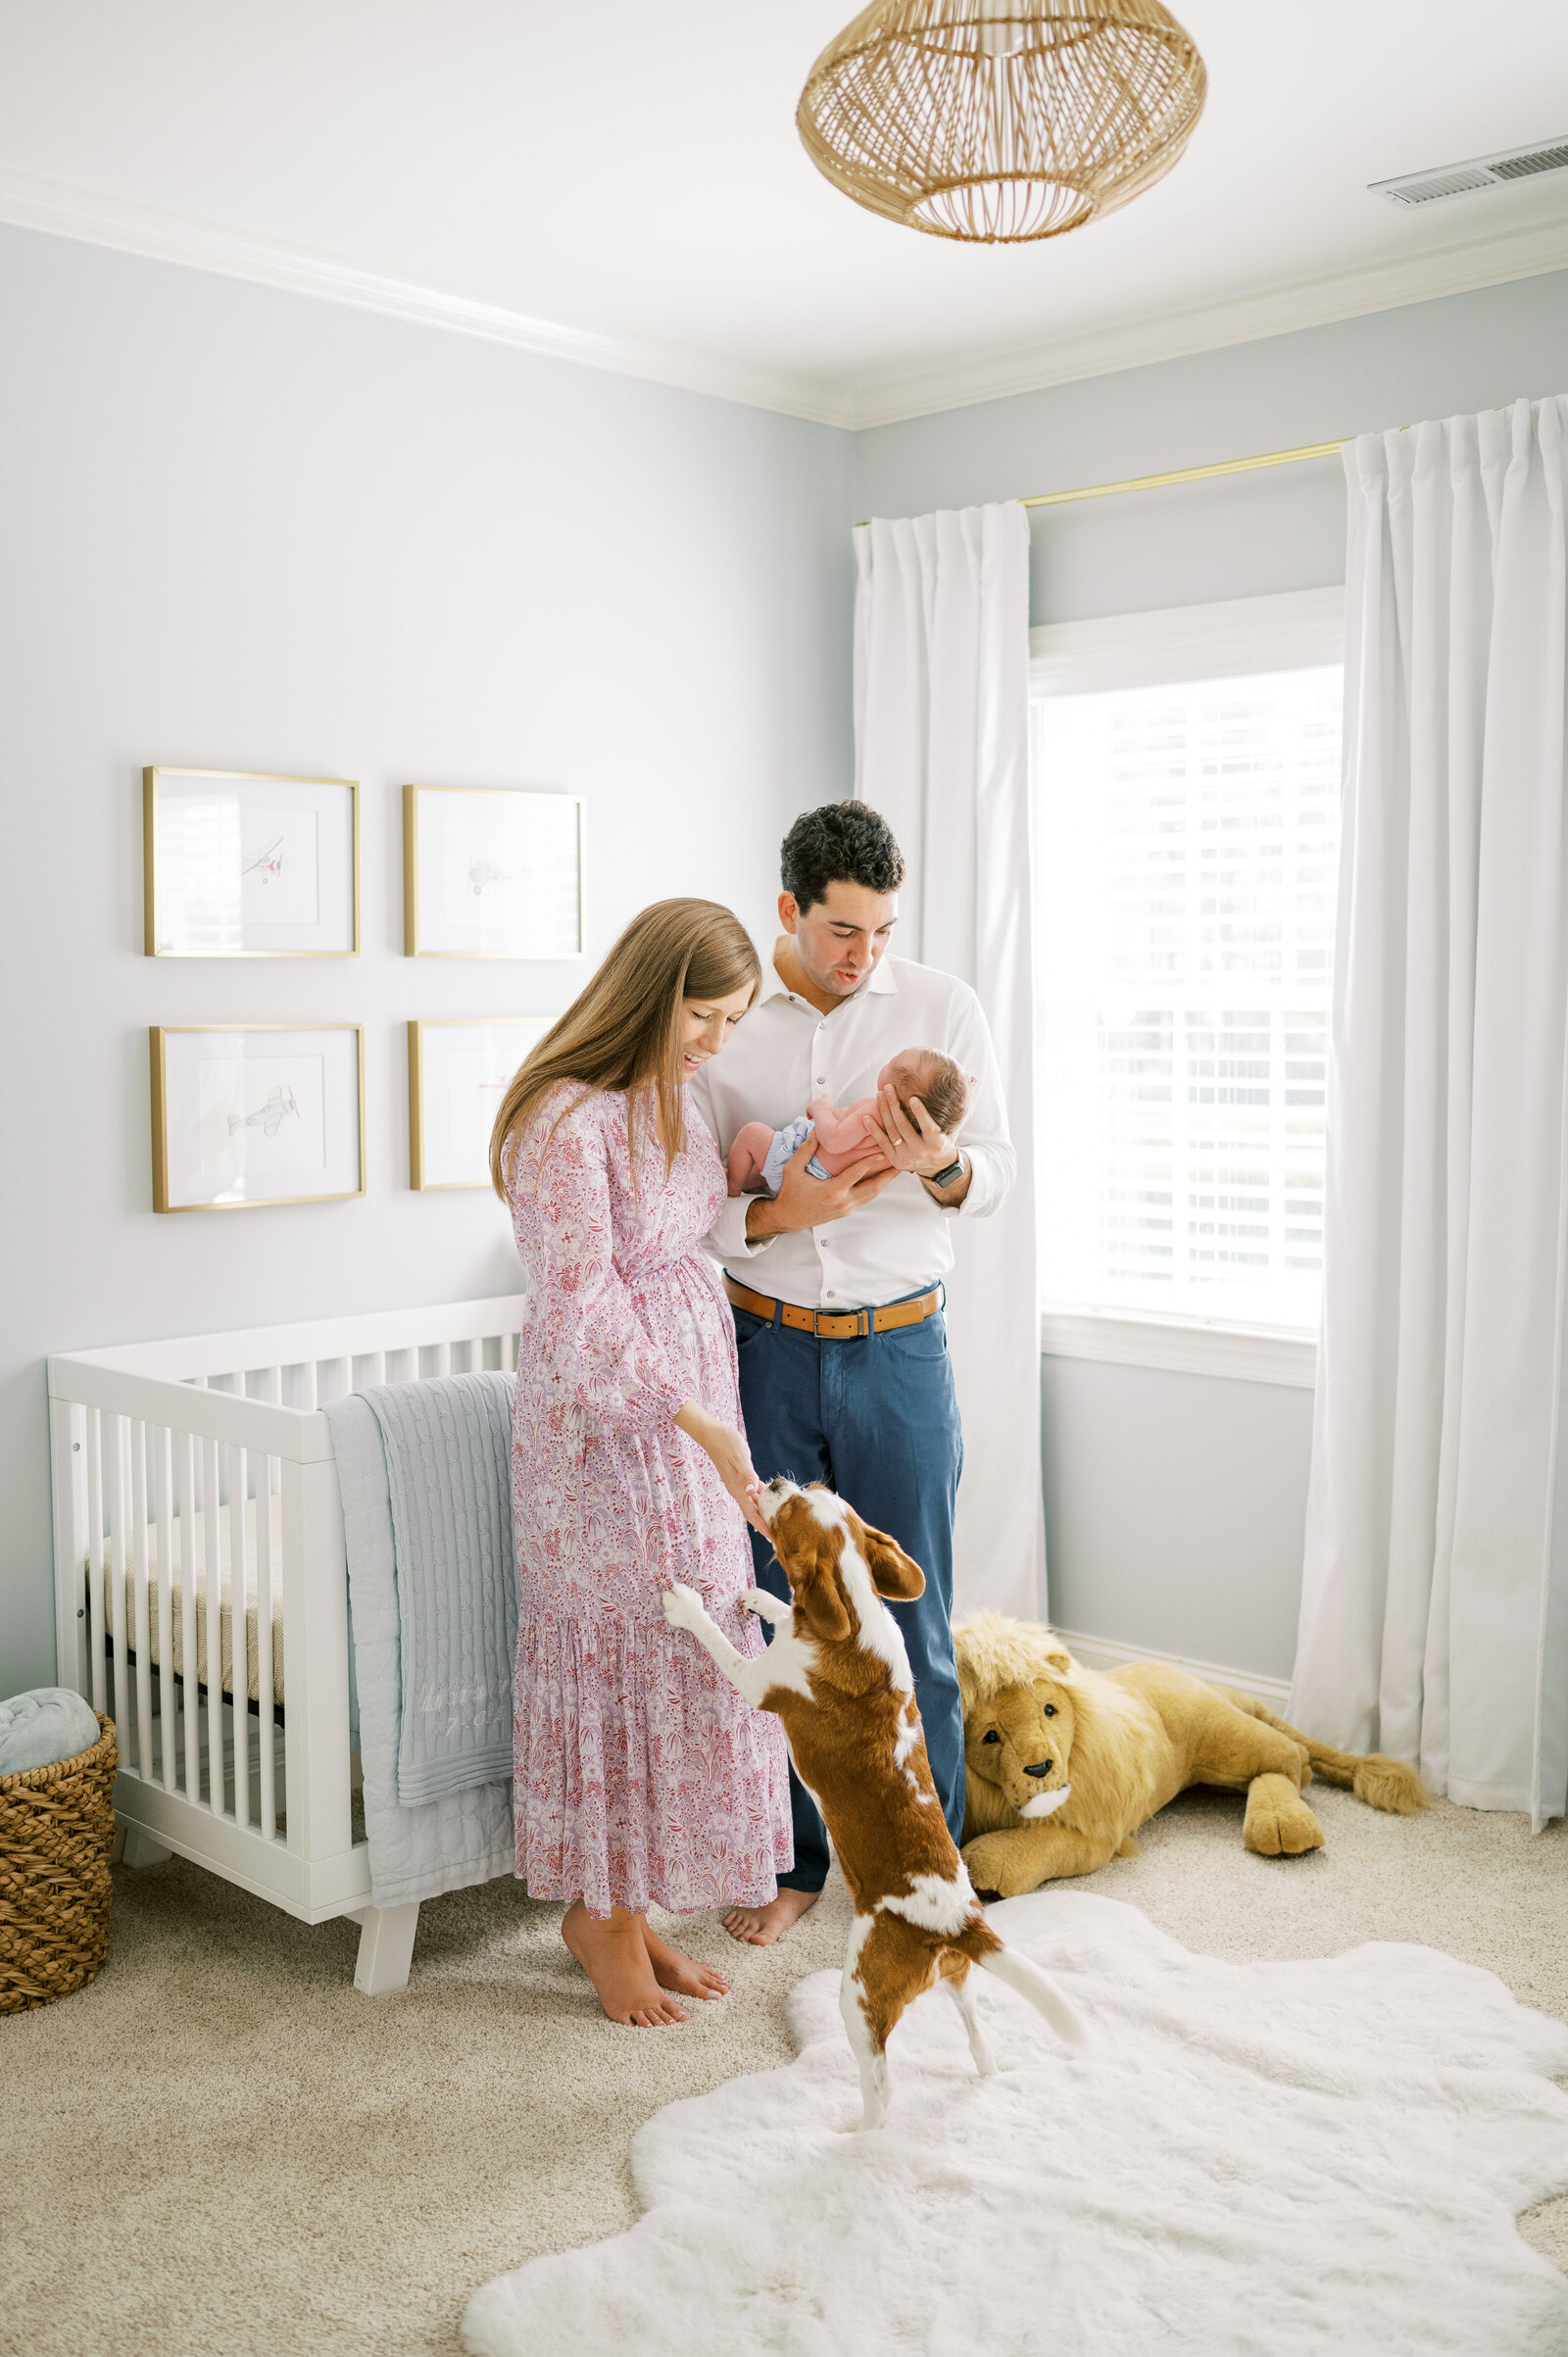 Man and woman stand in front of baby crib with Cavalier King Charles dog and newborn baby during photo session